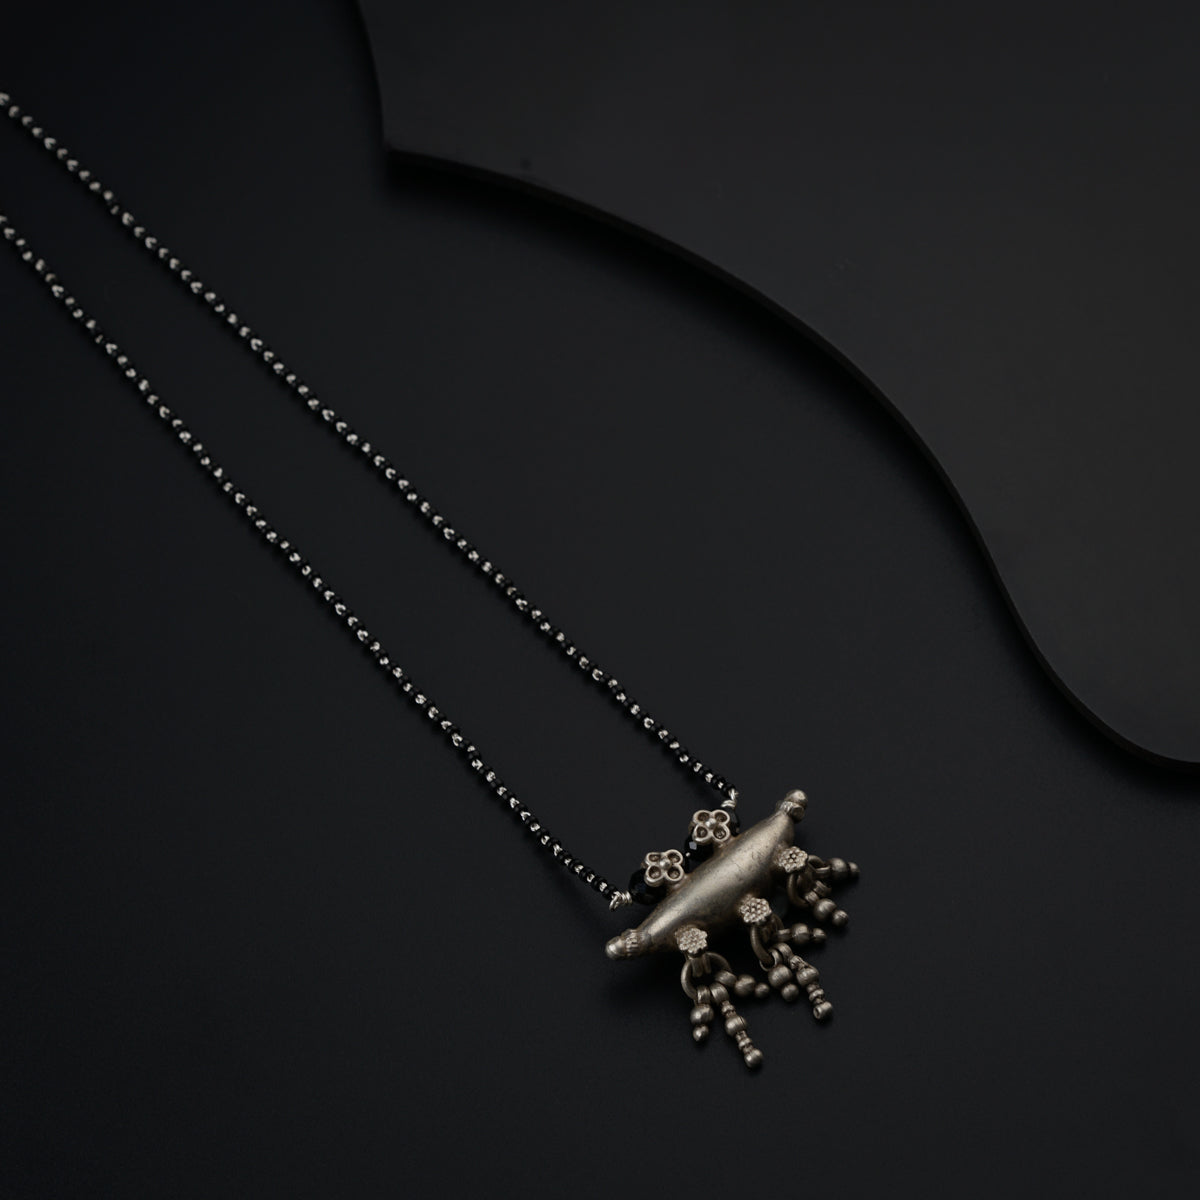 a necklace with a snowflake on it on a black surface